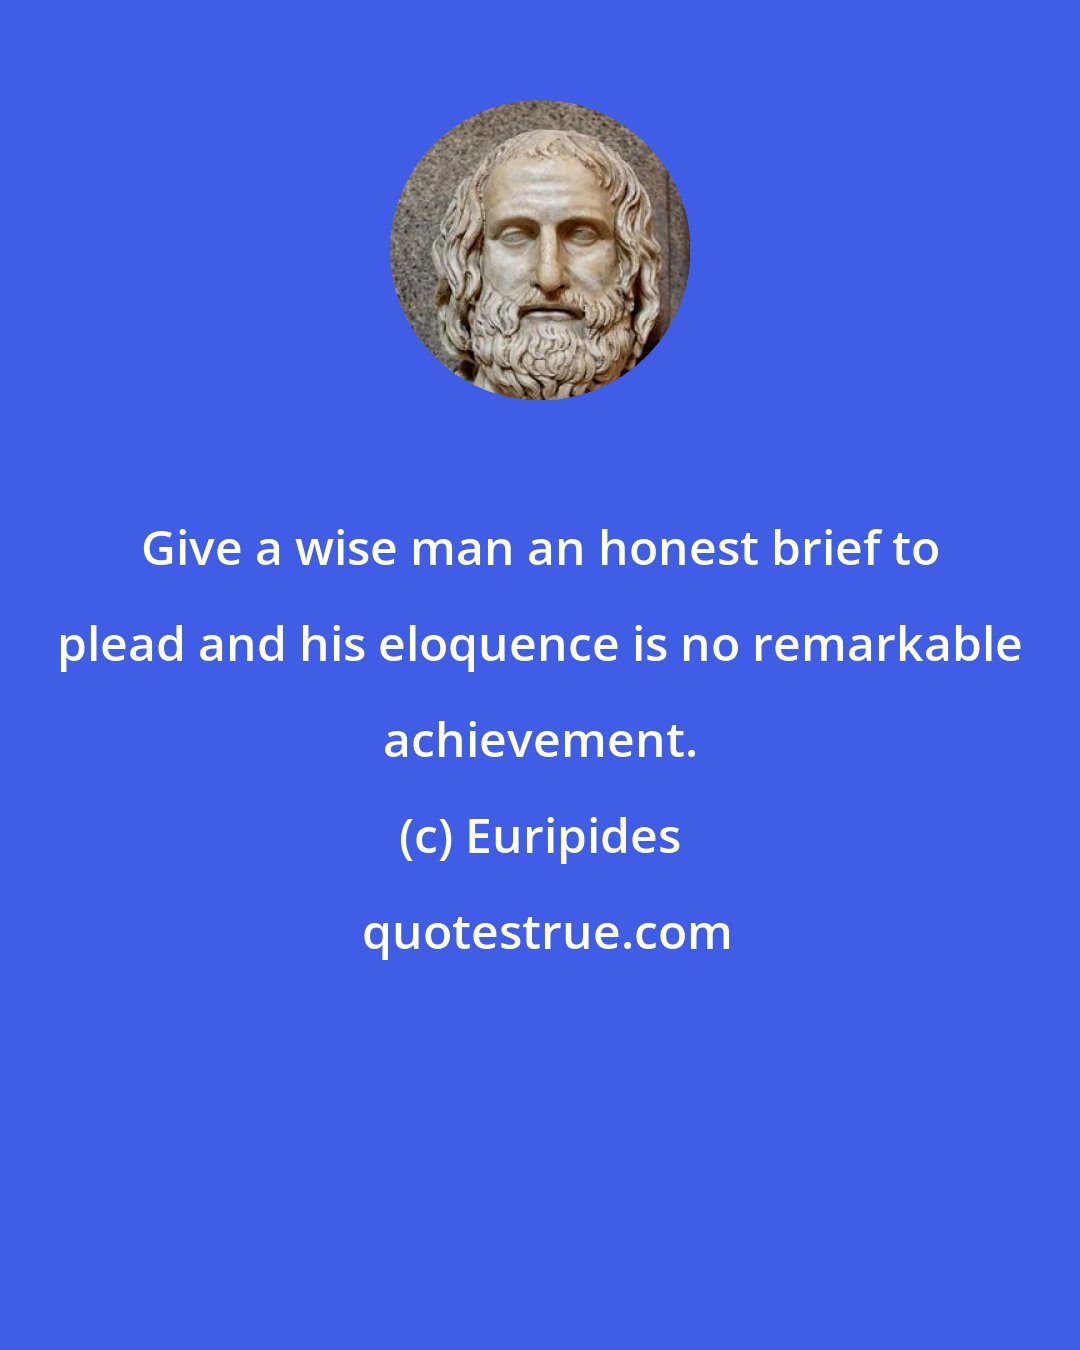 Euripides: Give a wise man an honest brief to plead and his eloquence is no remarkable achievement.